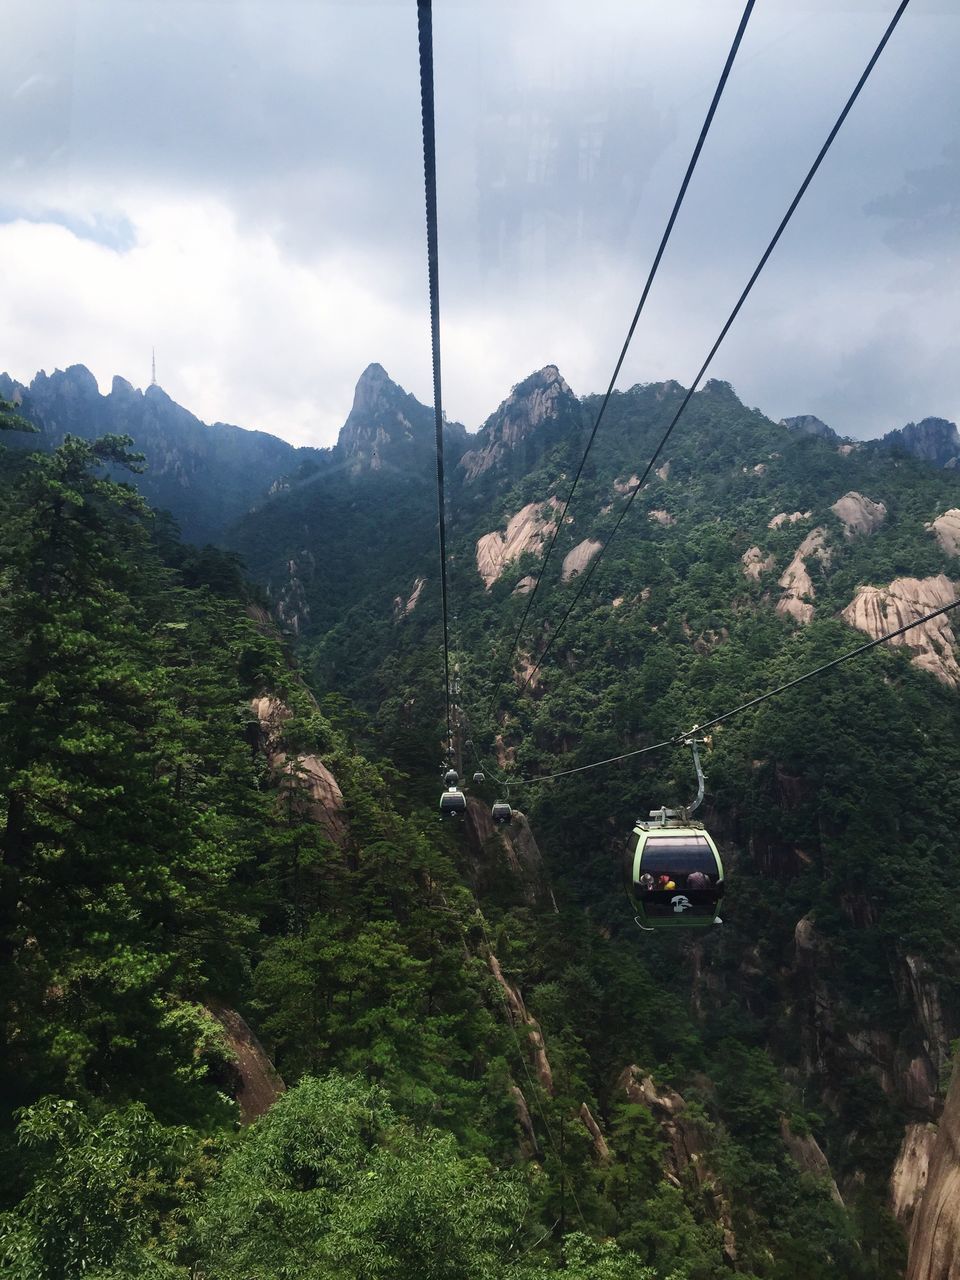 mountain, sky, tree, mountain range, cloud - sky, tranquility, landscape, overhead cable car, scenics, green color, tranquil scene, nature, power line, beauty in nature, cloud, lush foliage, growth, day, cable, non-urban scene, outdoors, plant, no people, cloudy, idyllic, hill, green, travel destinations, remote